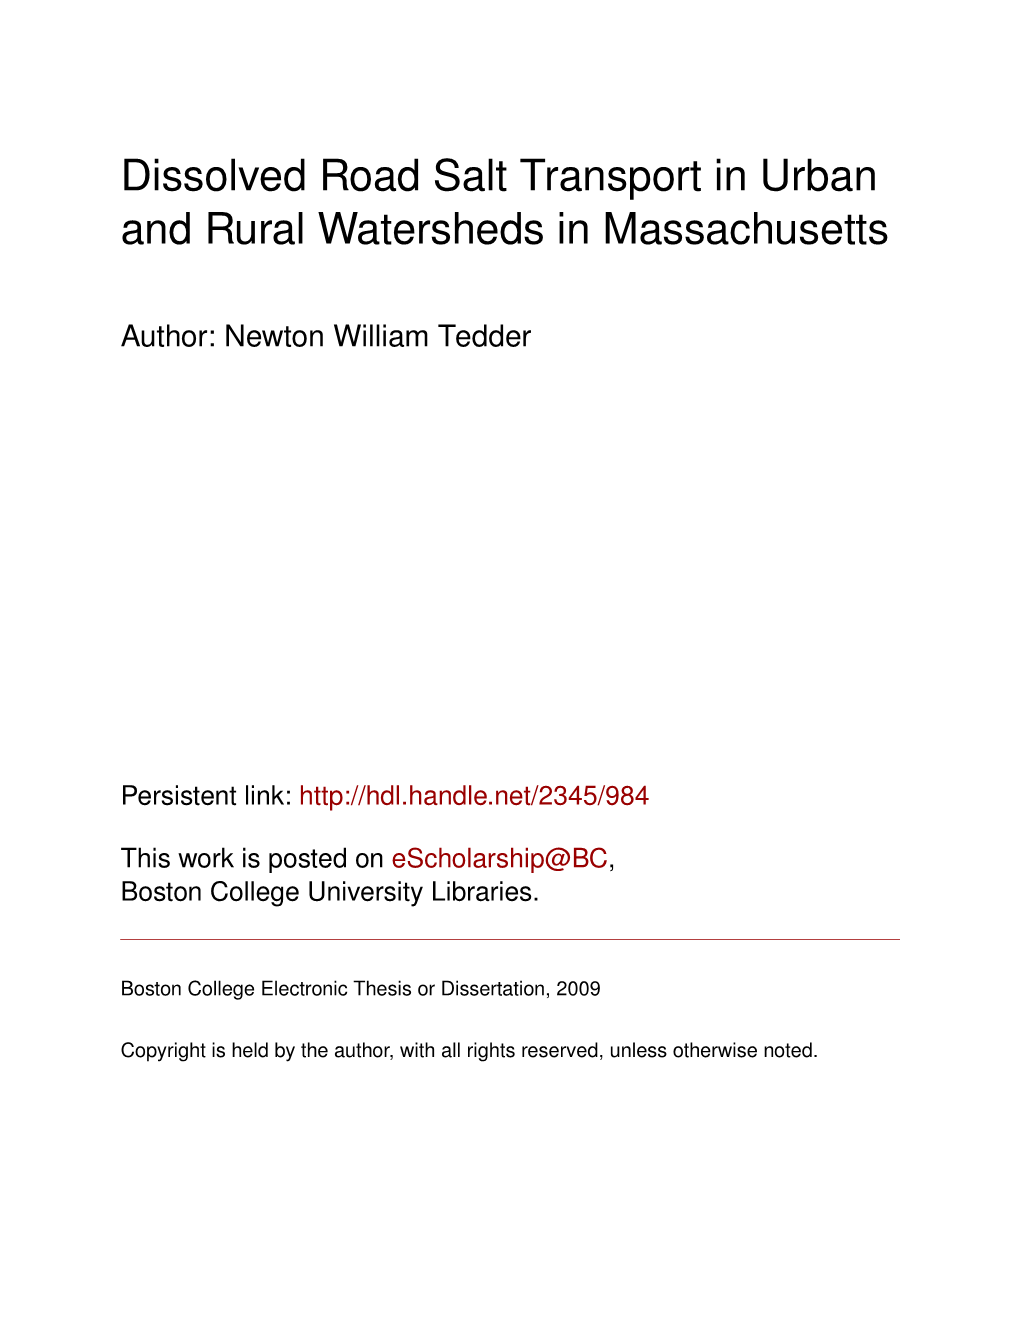 Dissolved Road Salt Transport in Urban and Rural Watersheds in Massachusetts